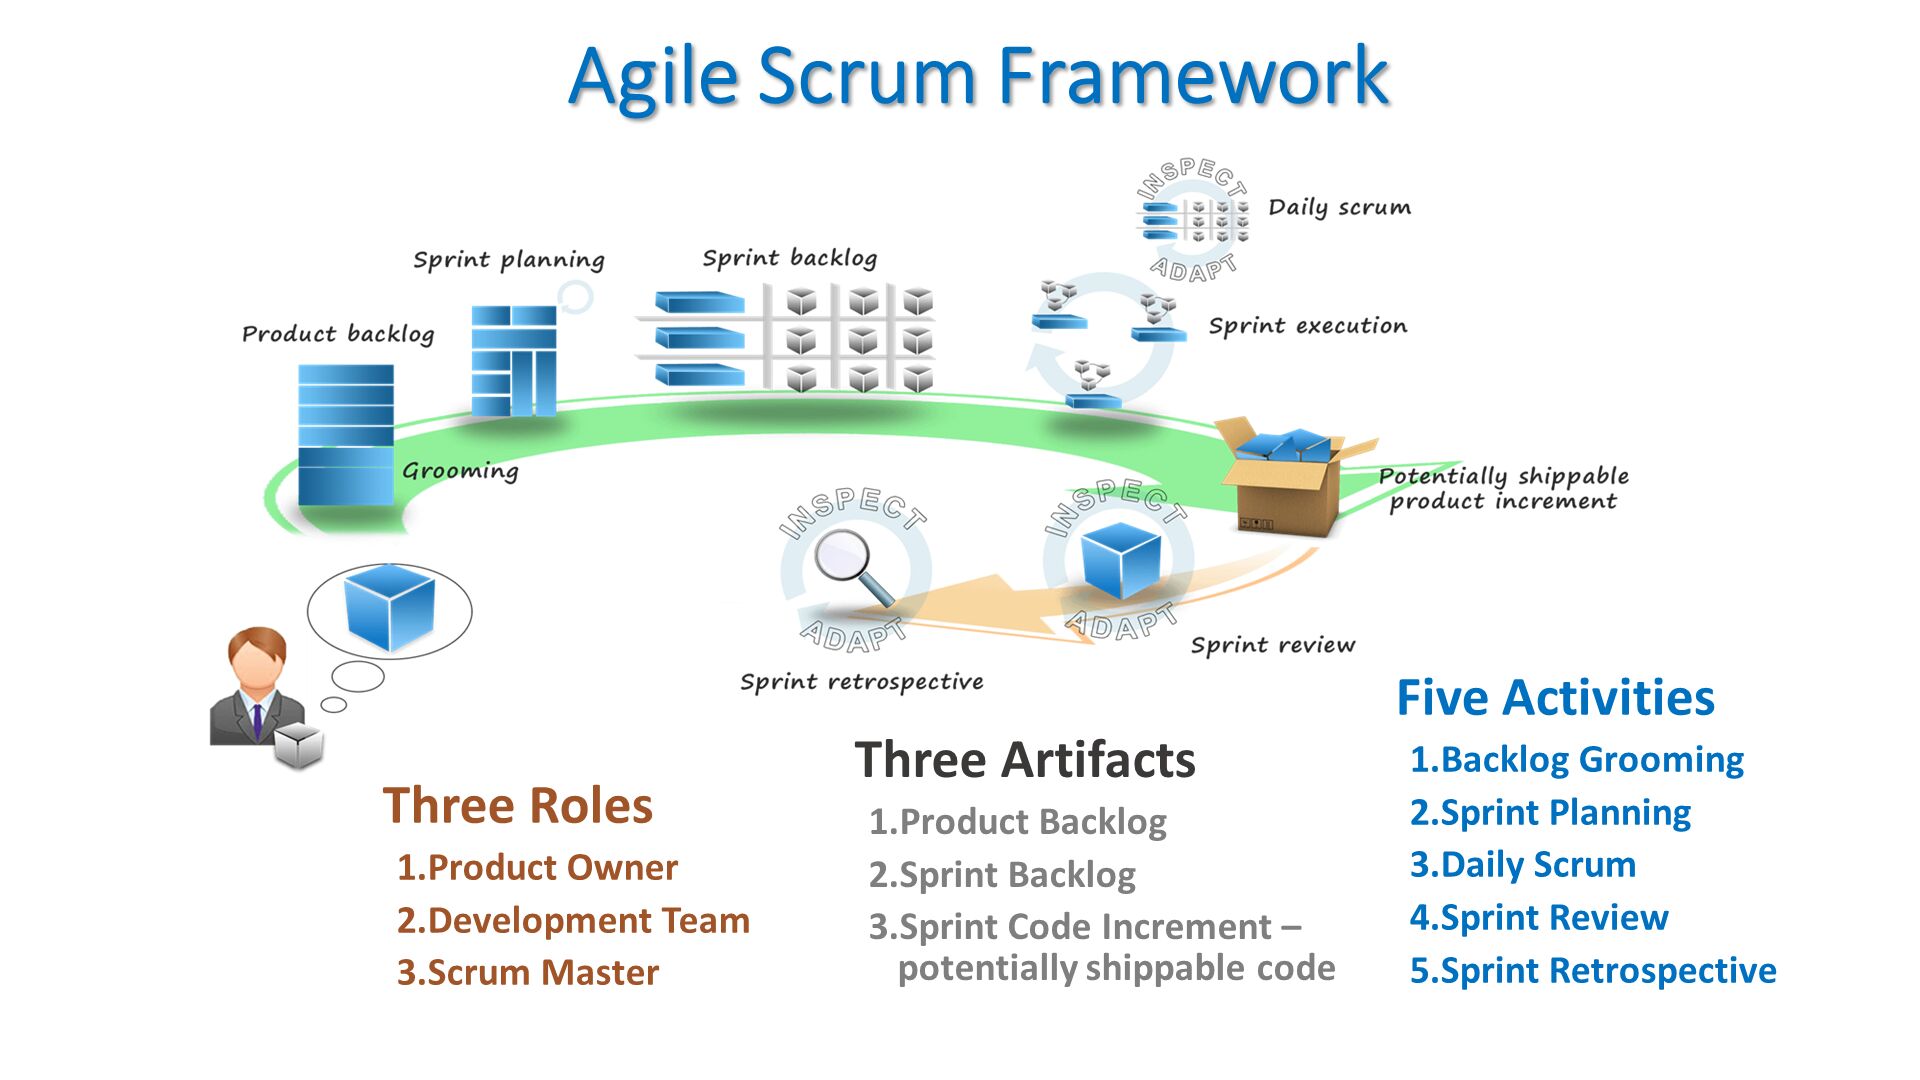 Agile Scrum Framework. Three Roles
Product Owner
Development Team
Scrum Master. Three Artifacts
Product Backlog
Sprint Backlog
Sprint Code Increment – potentially shippable code. Five Activities
Backlog Grooming
Sprint Planning
Daily Scrum
Sprint Review
Sprint Retrospective. 